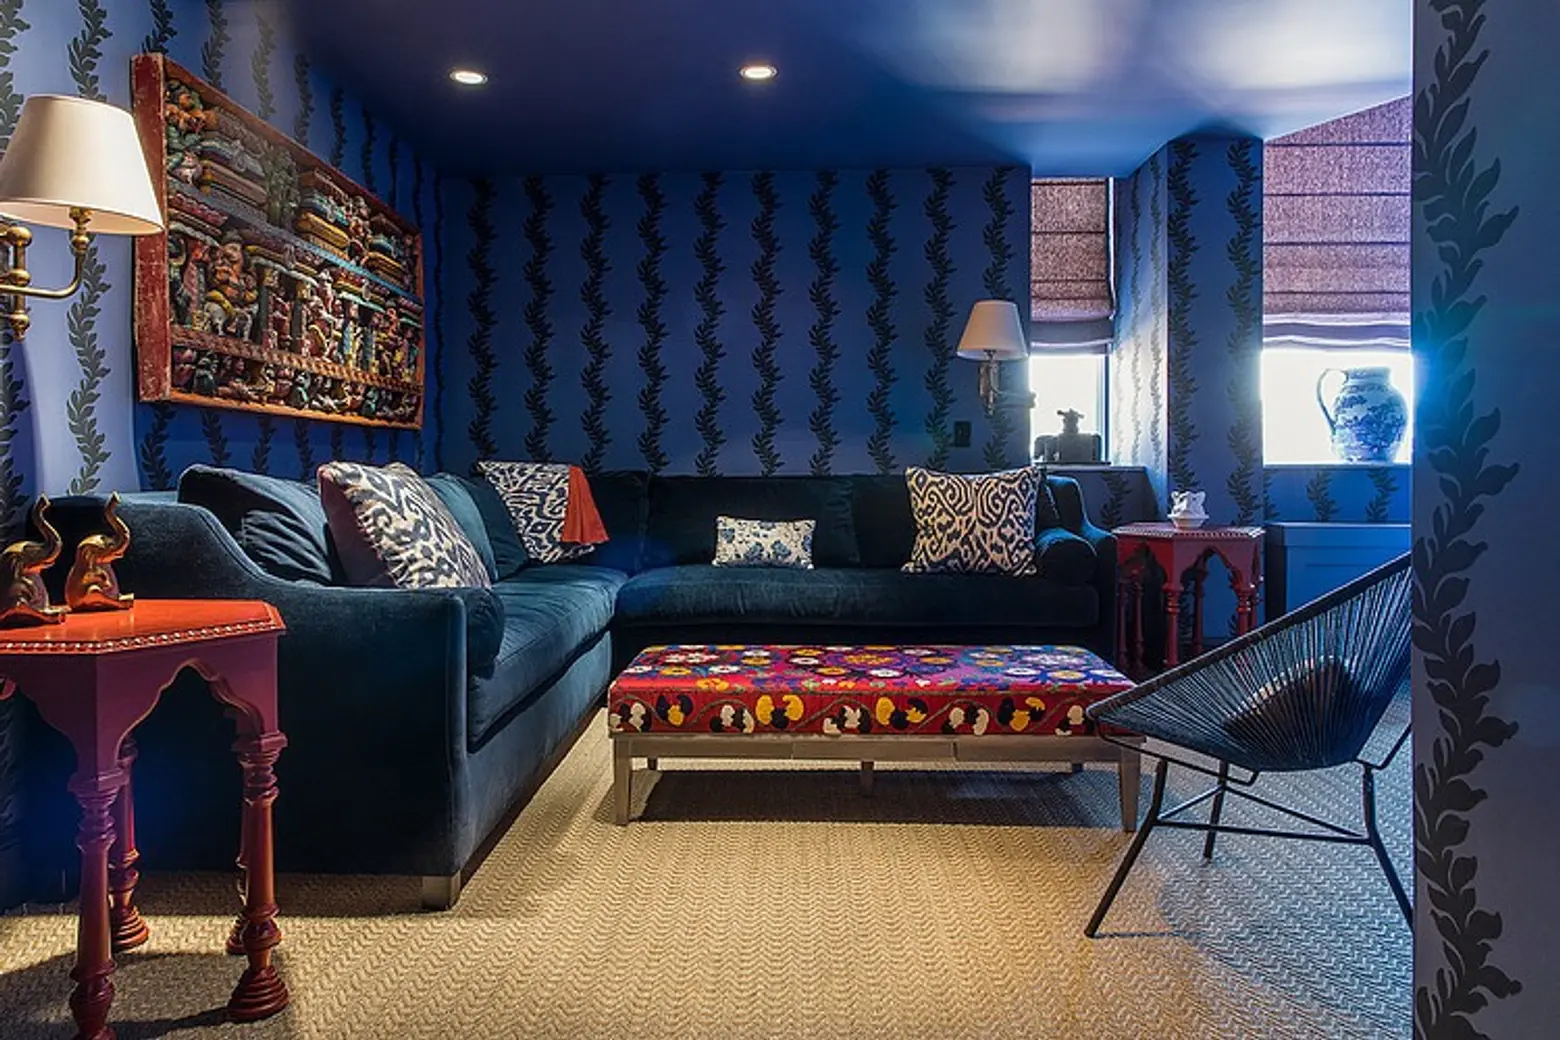 James Dixon Architect, Carolina George, Bond Street, bold colors and quirky accents